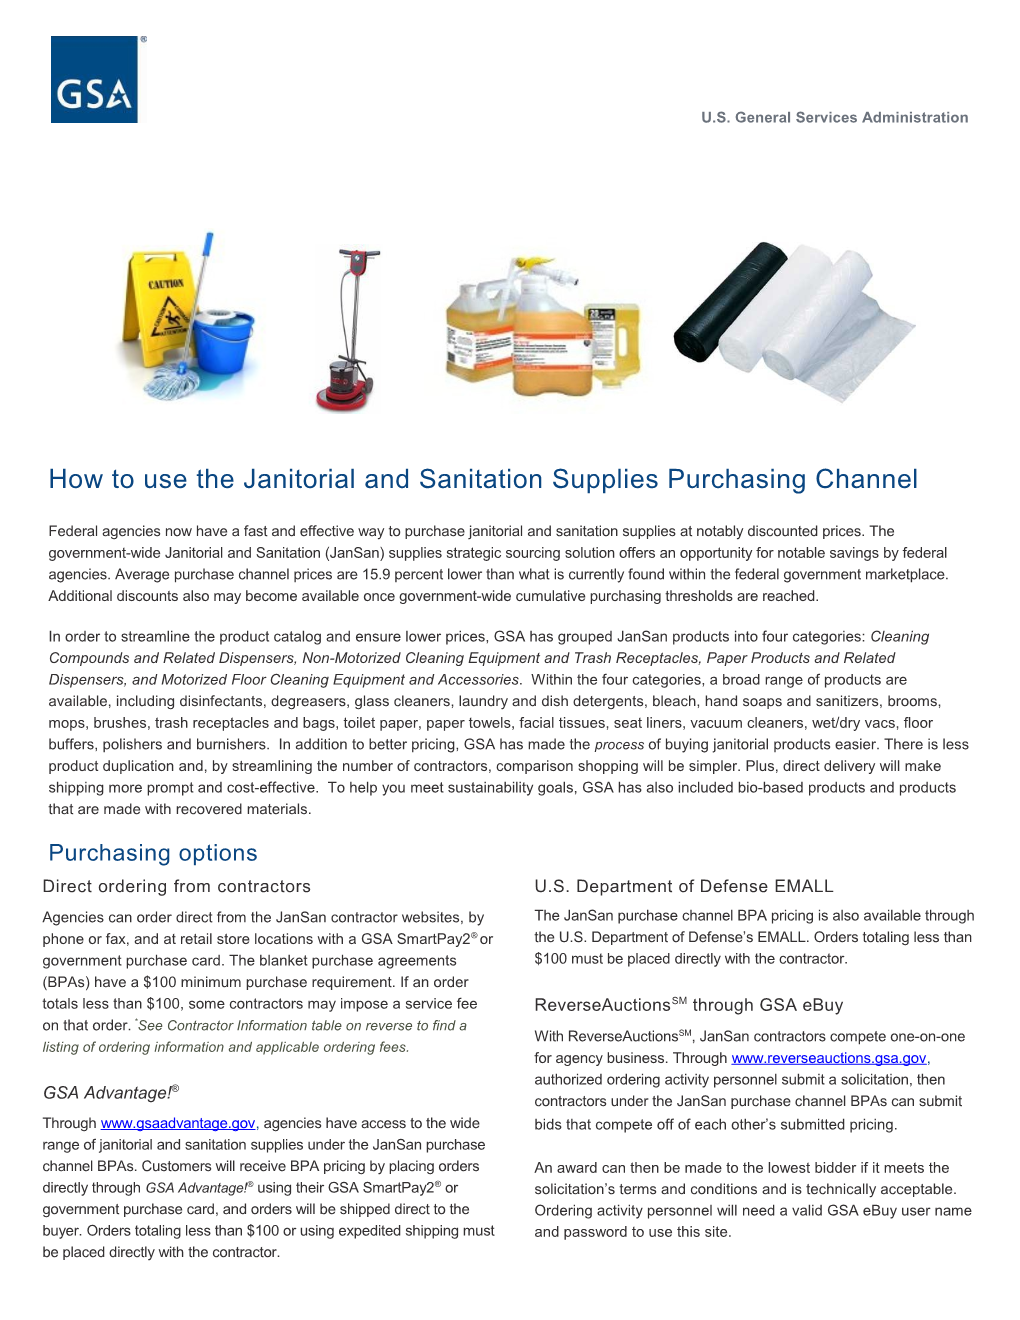 How to Use the Janitorial and Sanitation Supplies Purchasing Channel